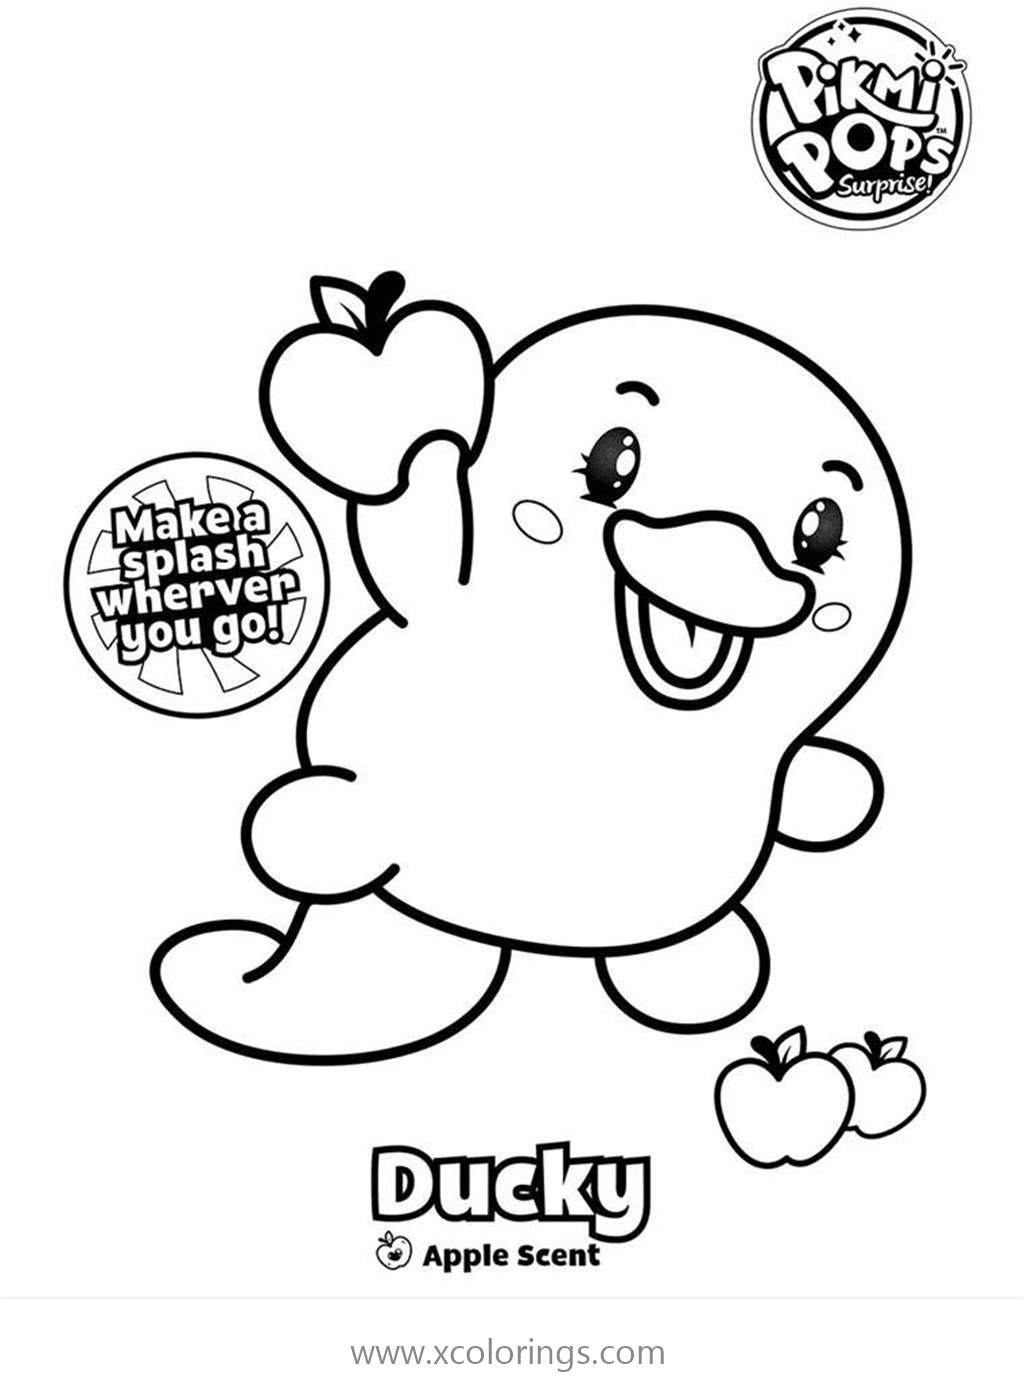 Free Pikmi Pops Coloring Pages Ducky The Platypus printable